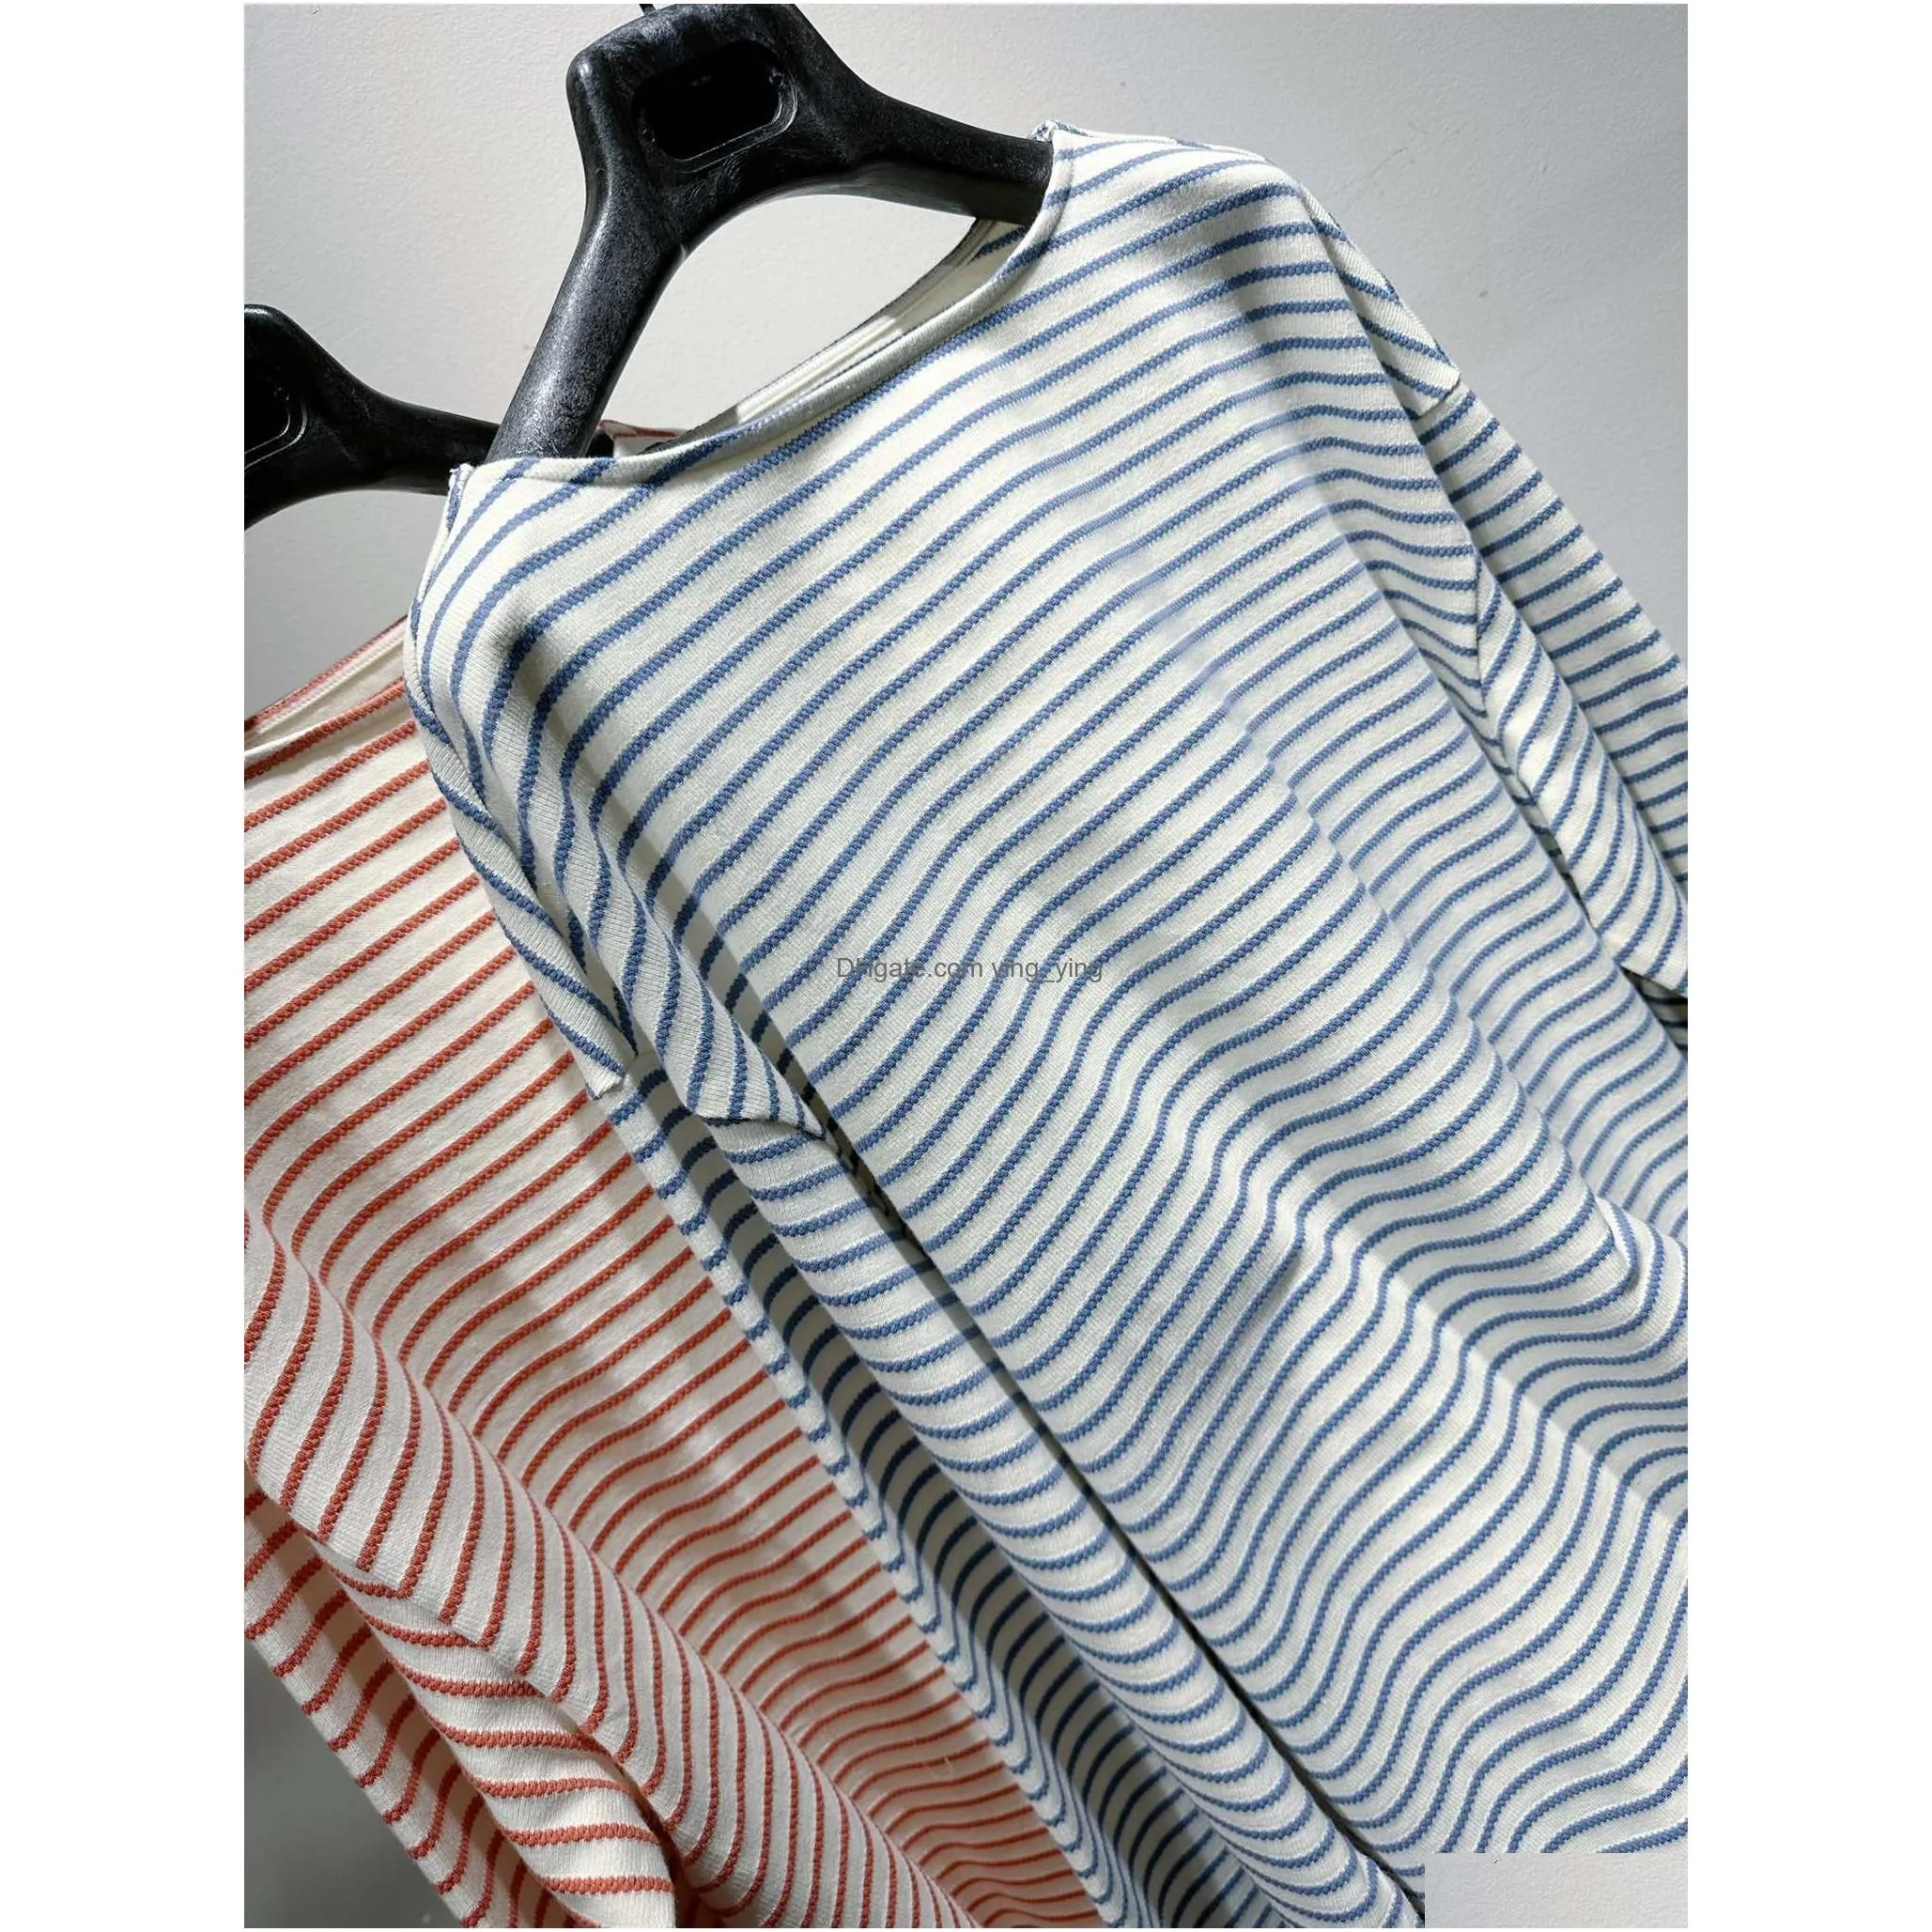 early autumn relaxation stripe top